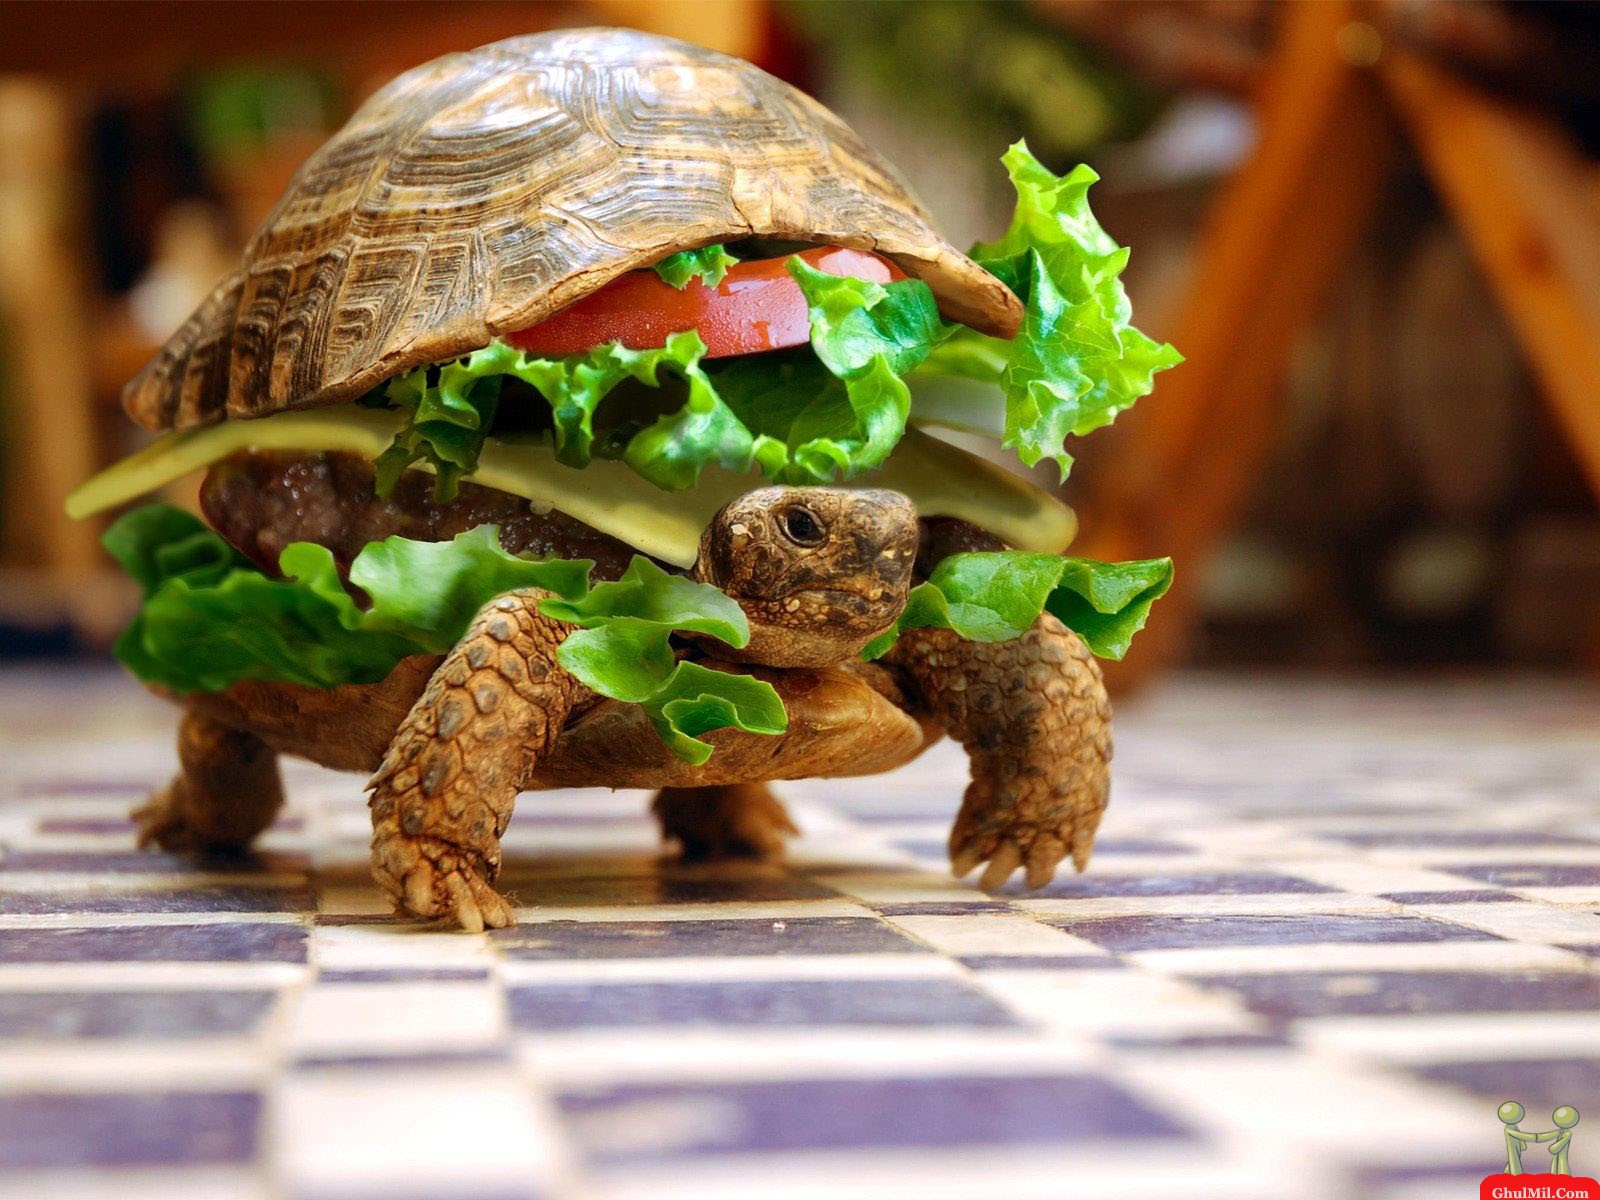 Pak World Fun Fresh Live Turtle Burger Wallpaper Very Funny Hung Out